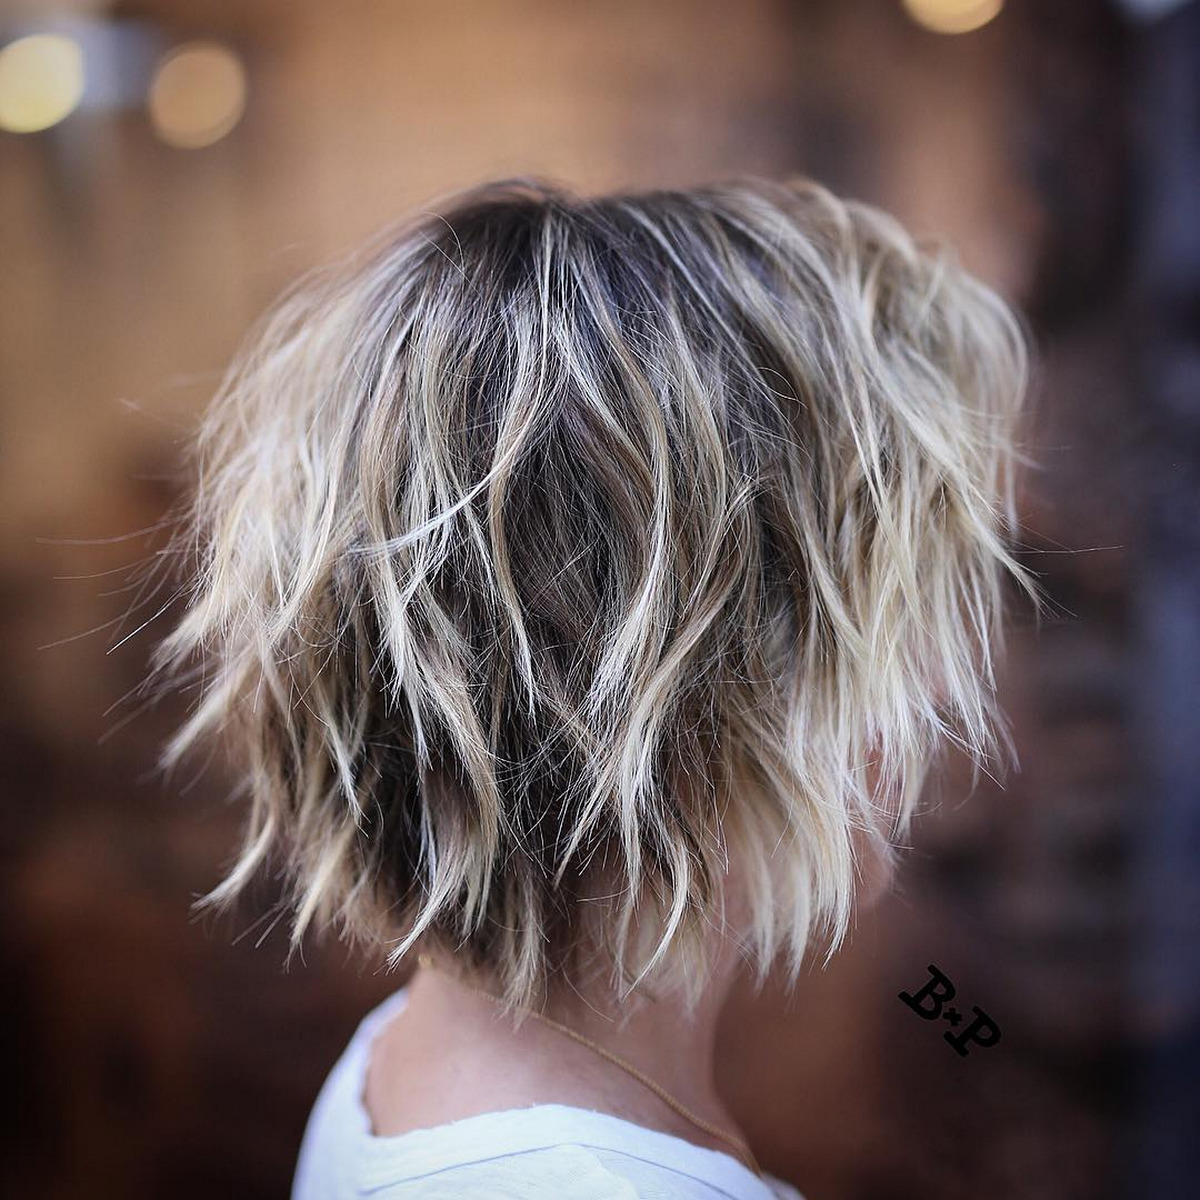 Blonde Shaggy Hair With Dark Roots